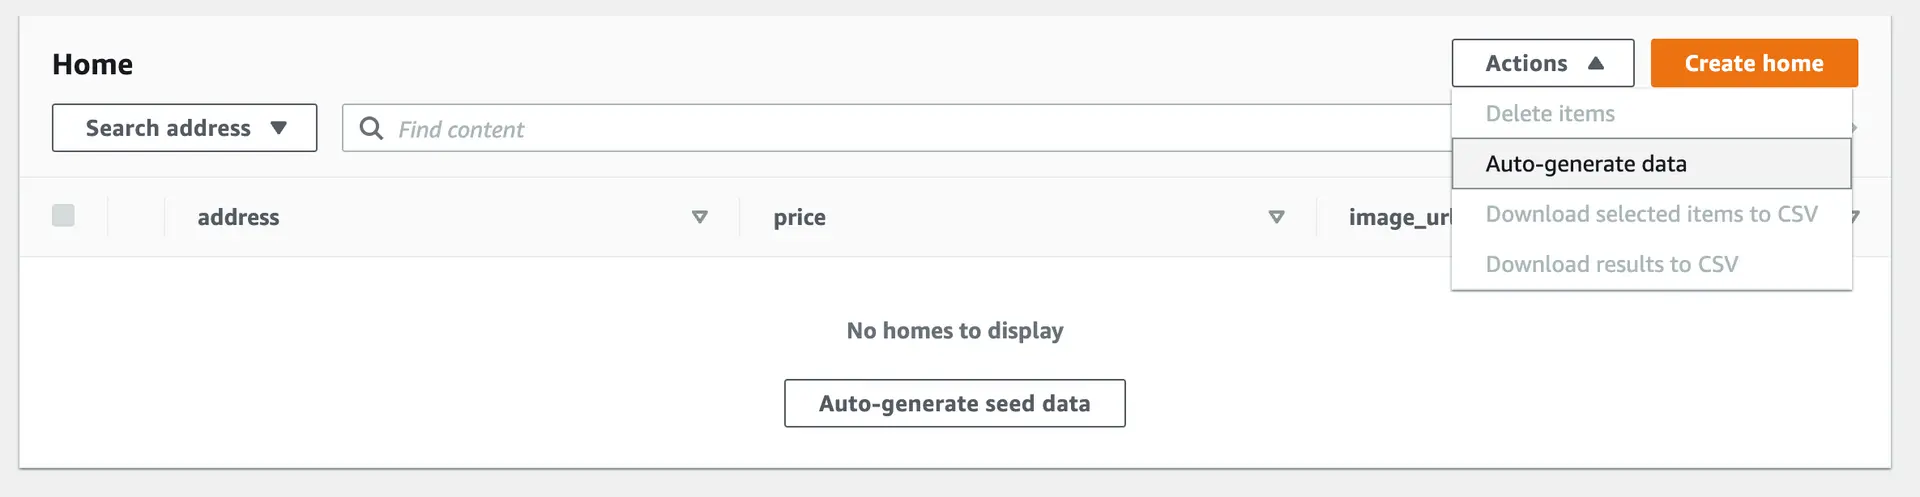 Screenshot showing the "Auto-generate seed data" button